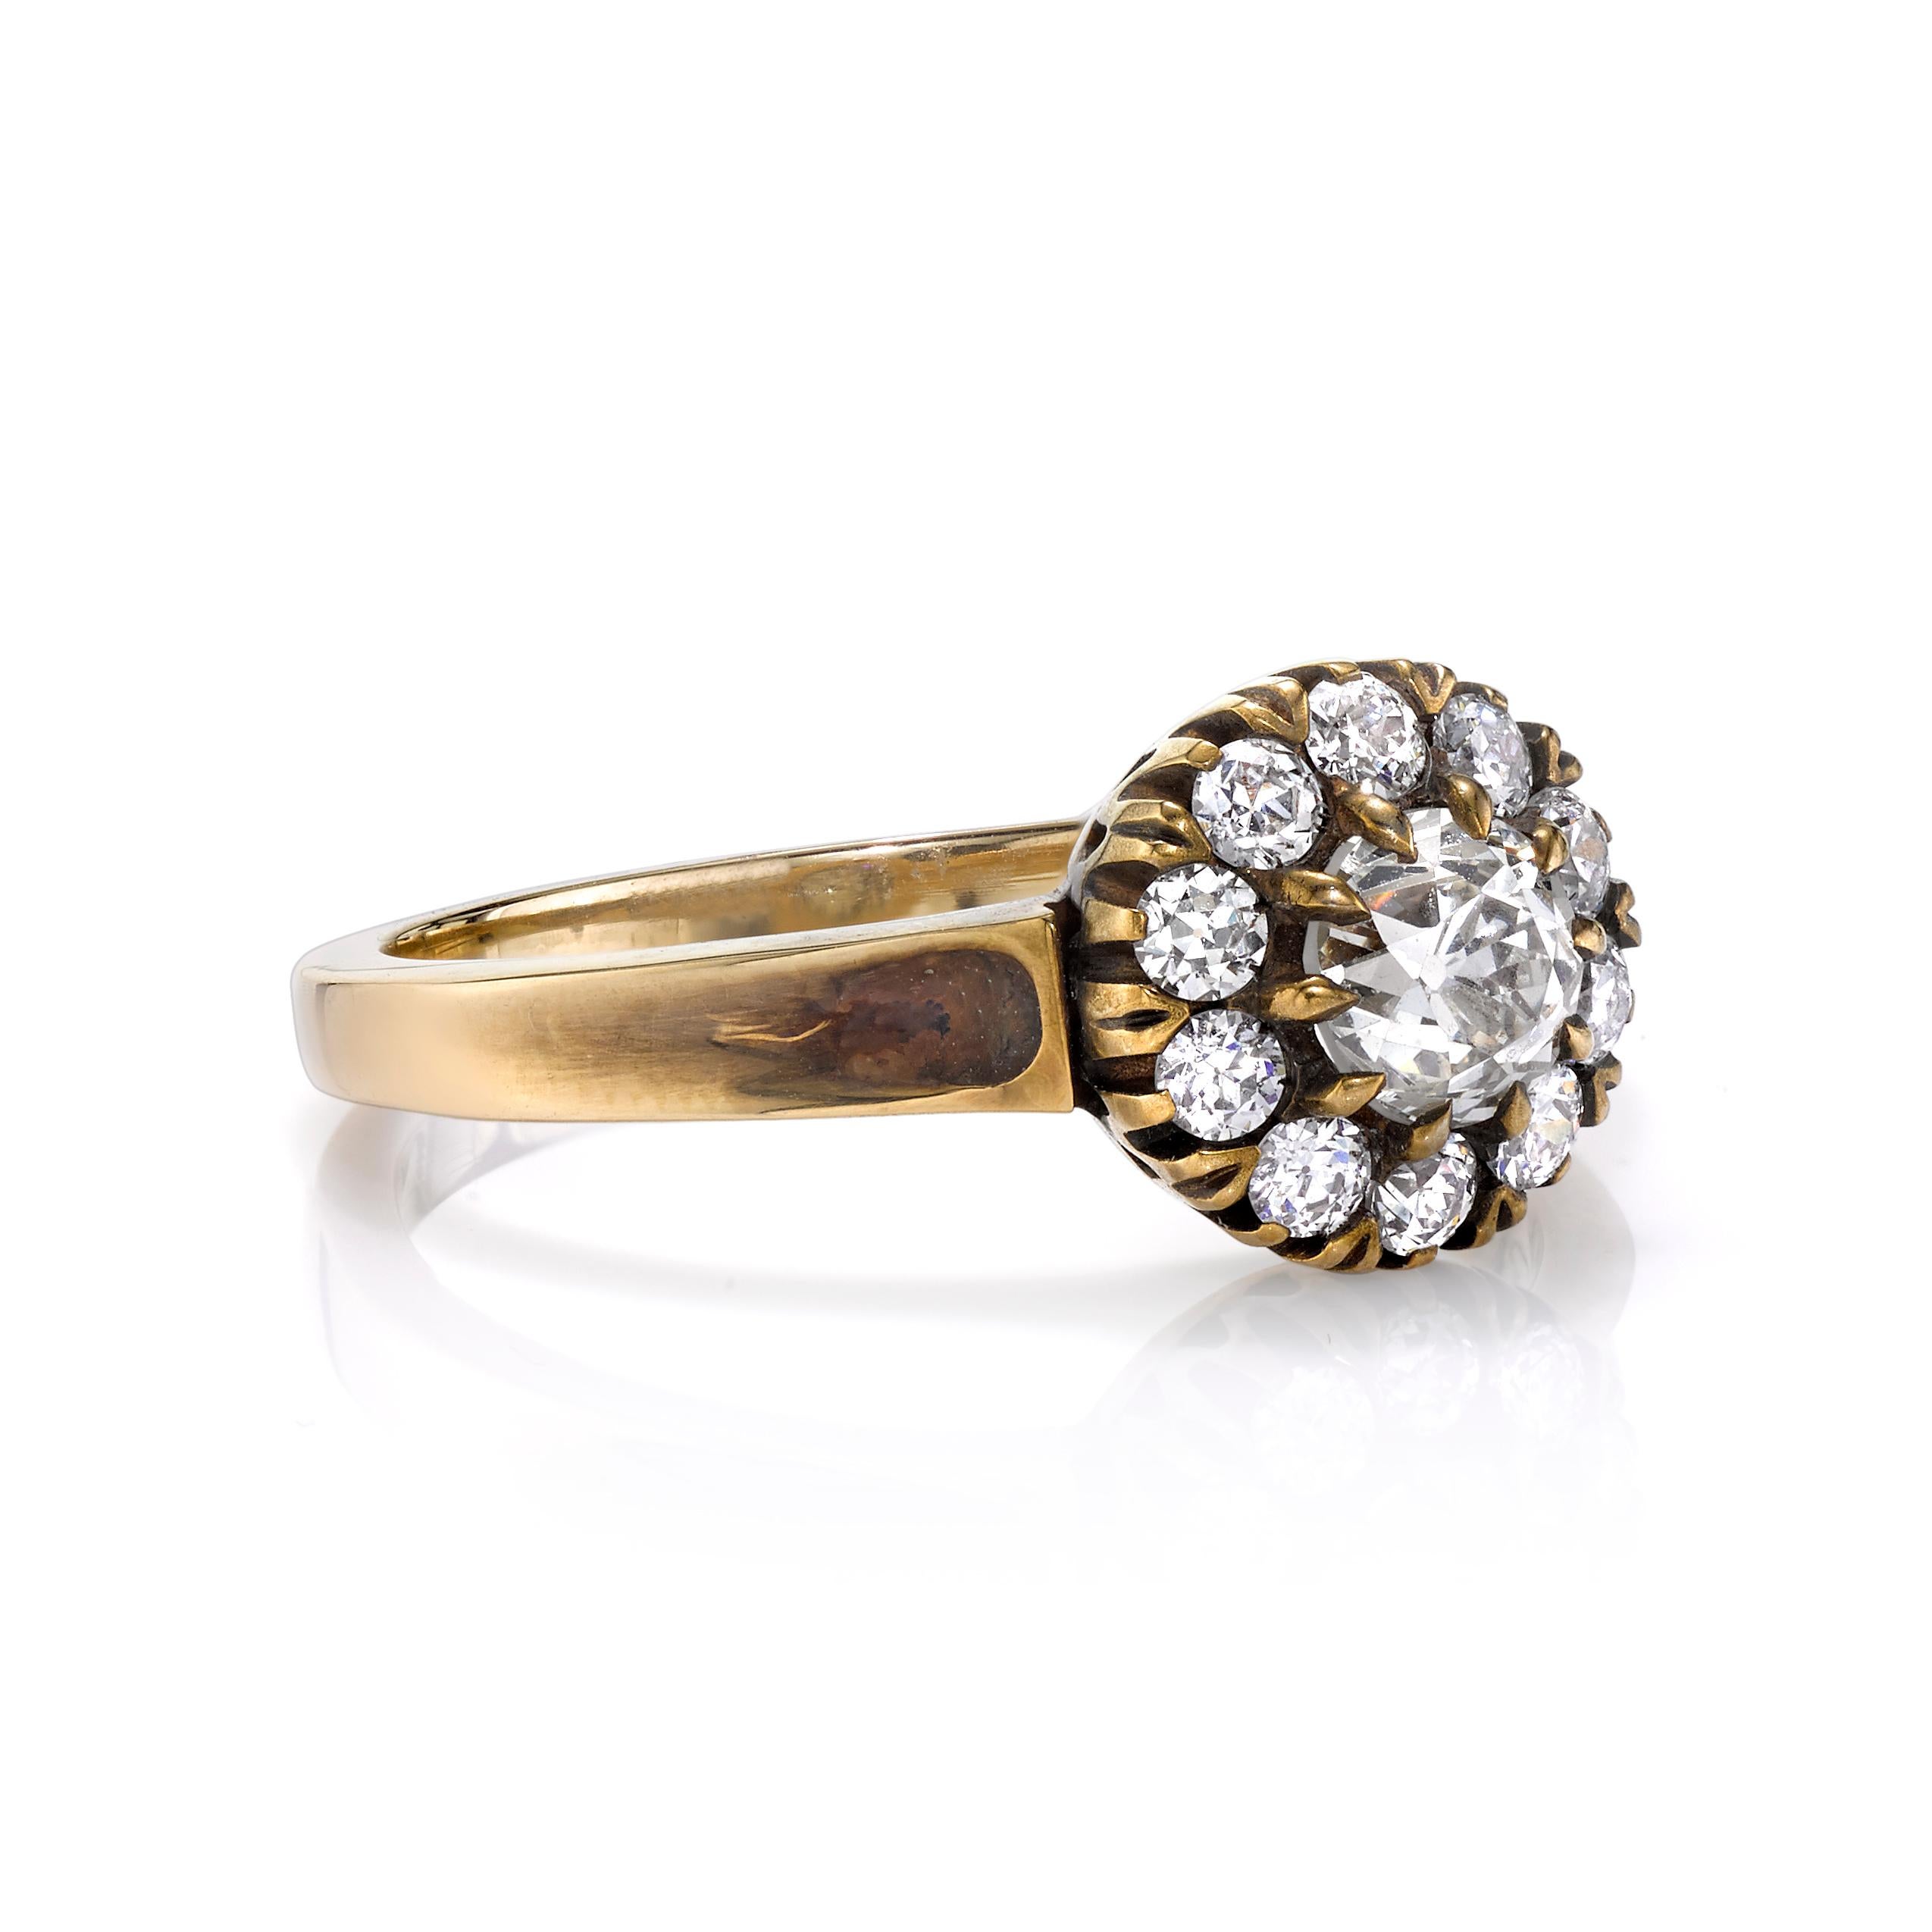 0.47ct L-M/VS antique old mine cut diamond with 0.35ctw diamond accents set in a handcrafted 18K oxidized white and yellow gold mounting. 

Ring is currently size 6. Please contact us about potential re-sizing.

Our jewelry is made locally in Los